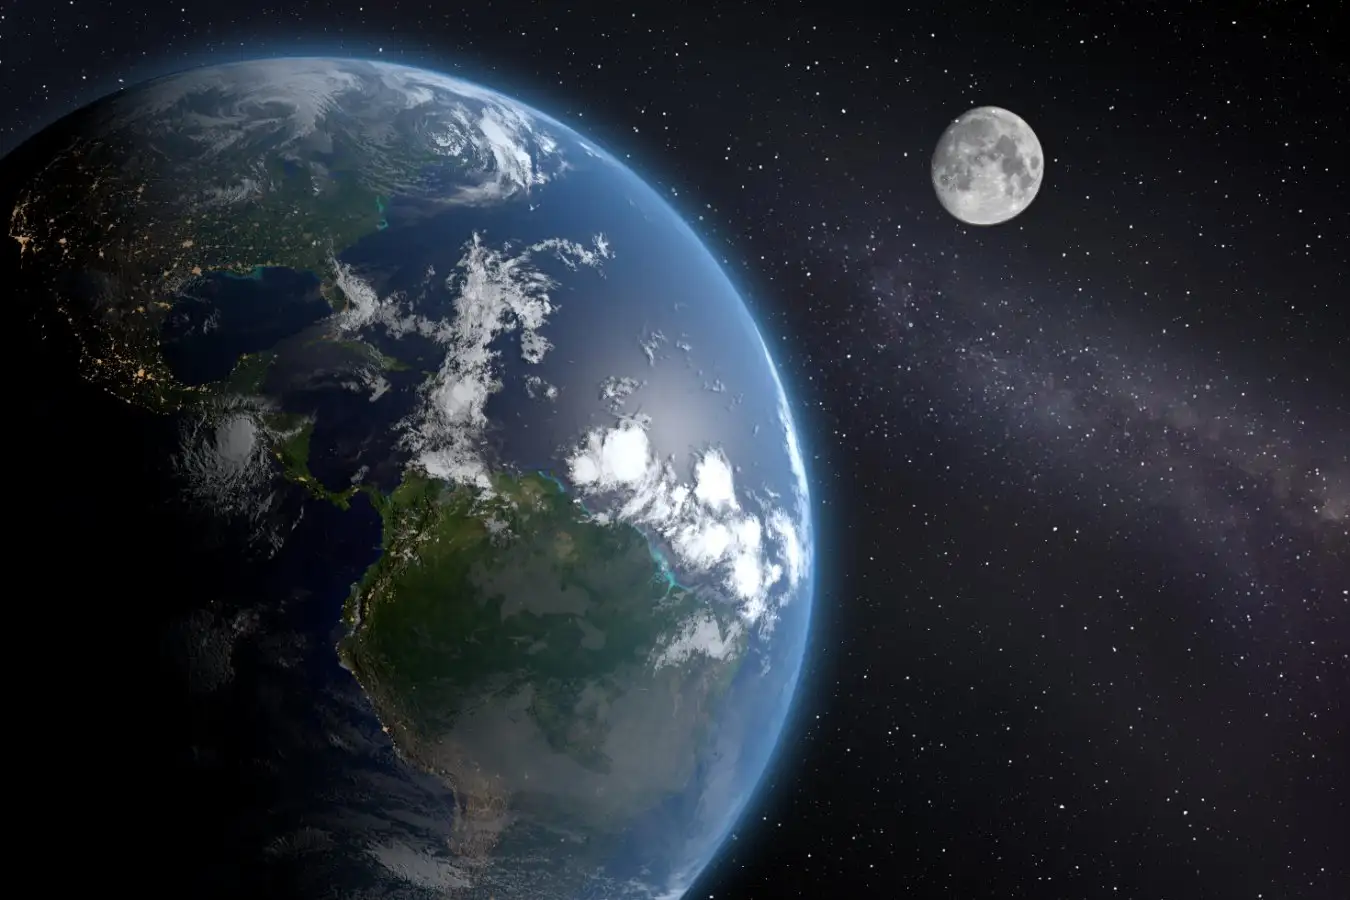 Water first brought to Earth when the Moon formed some 4.4bn years ago, planetologists discover